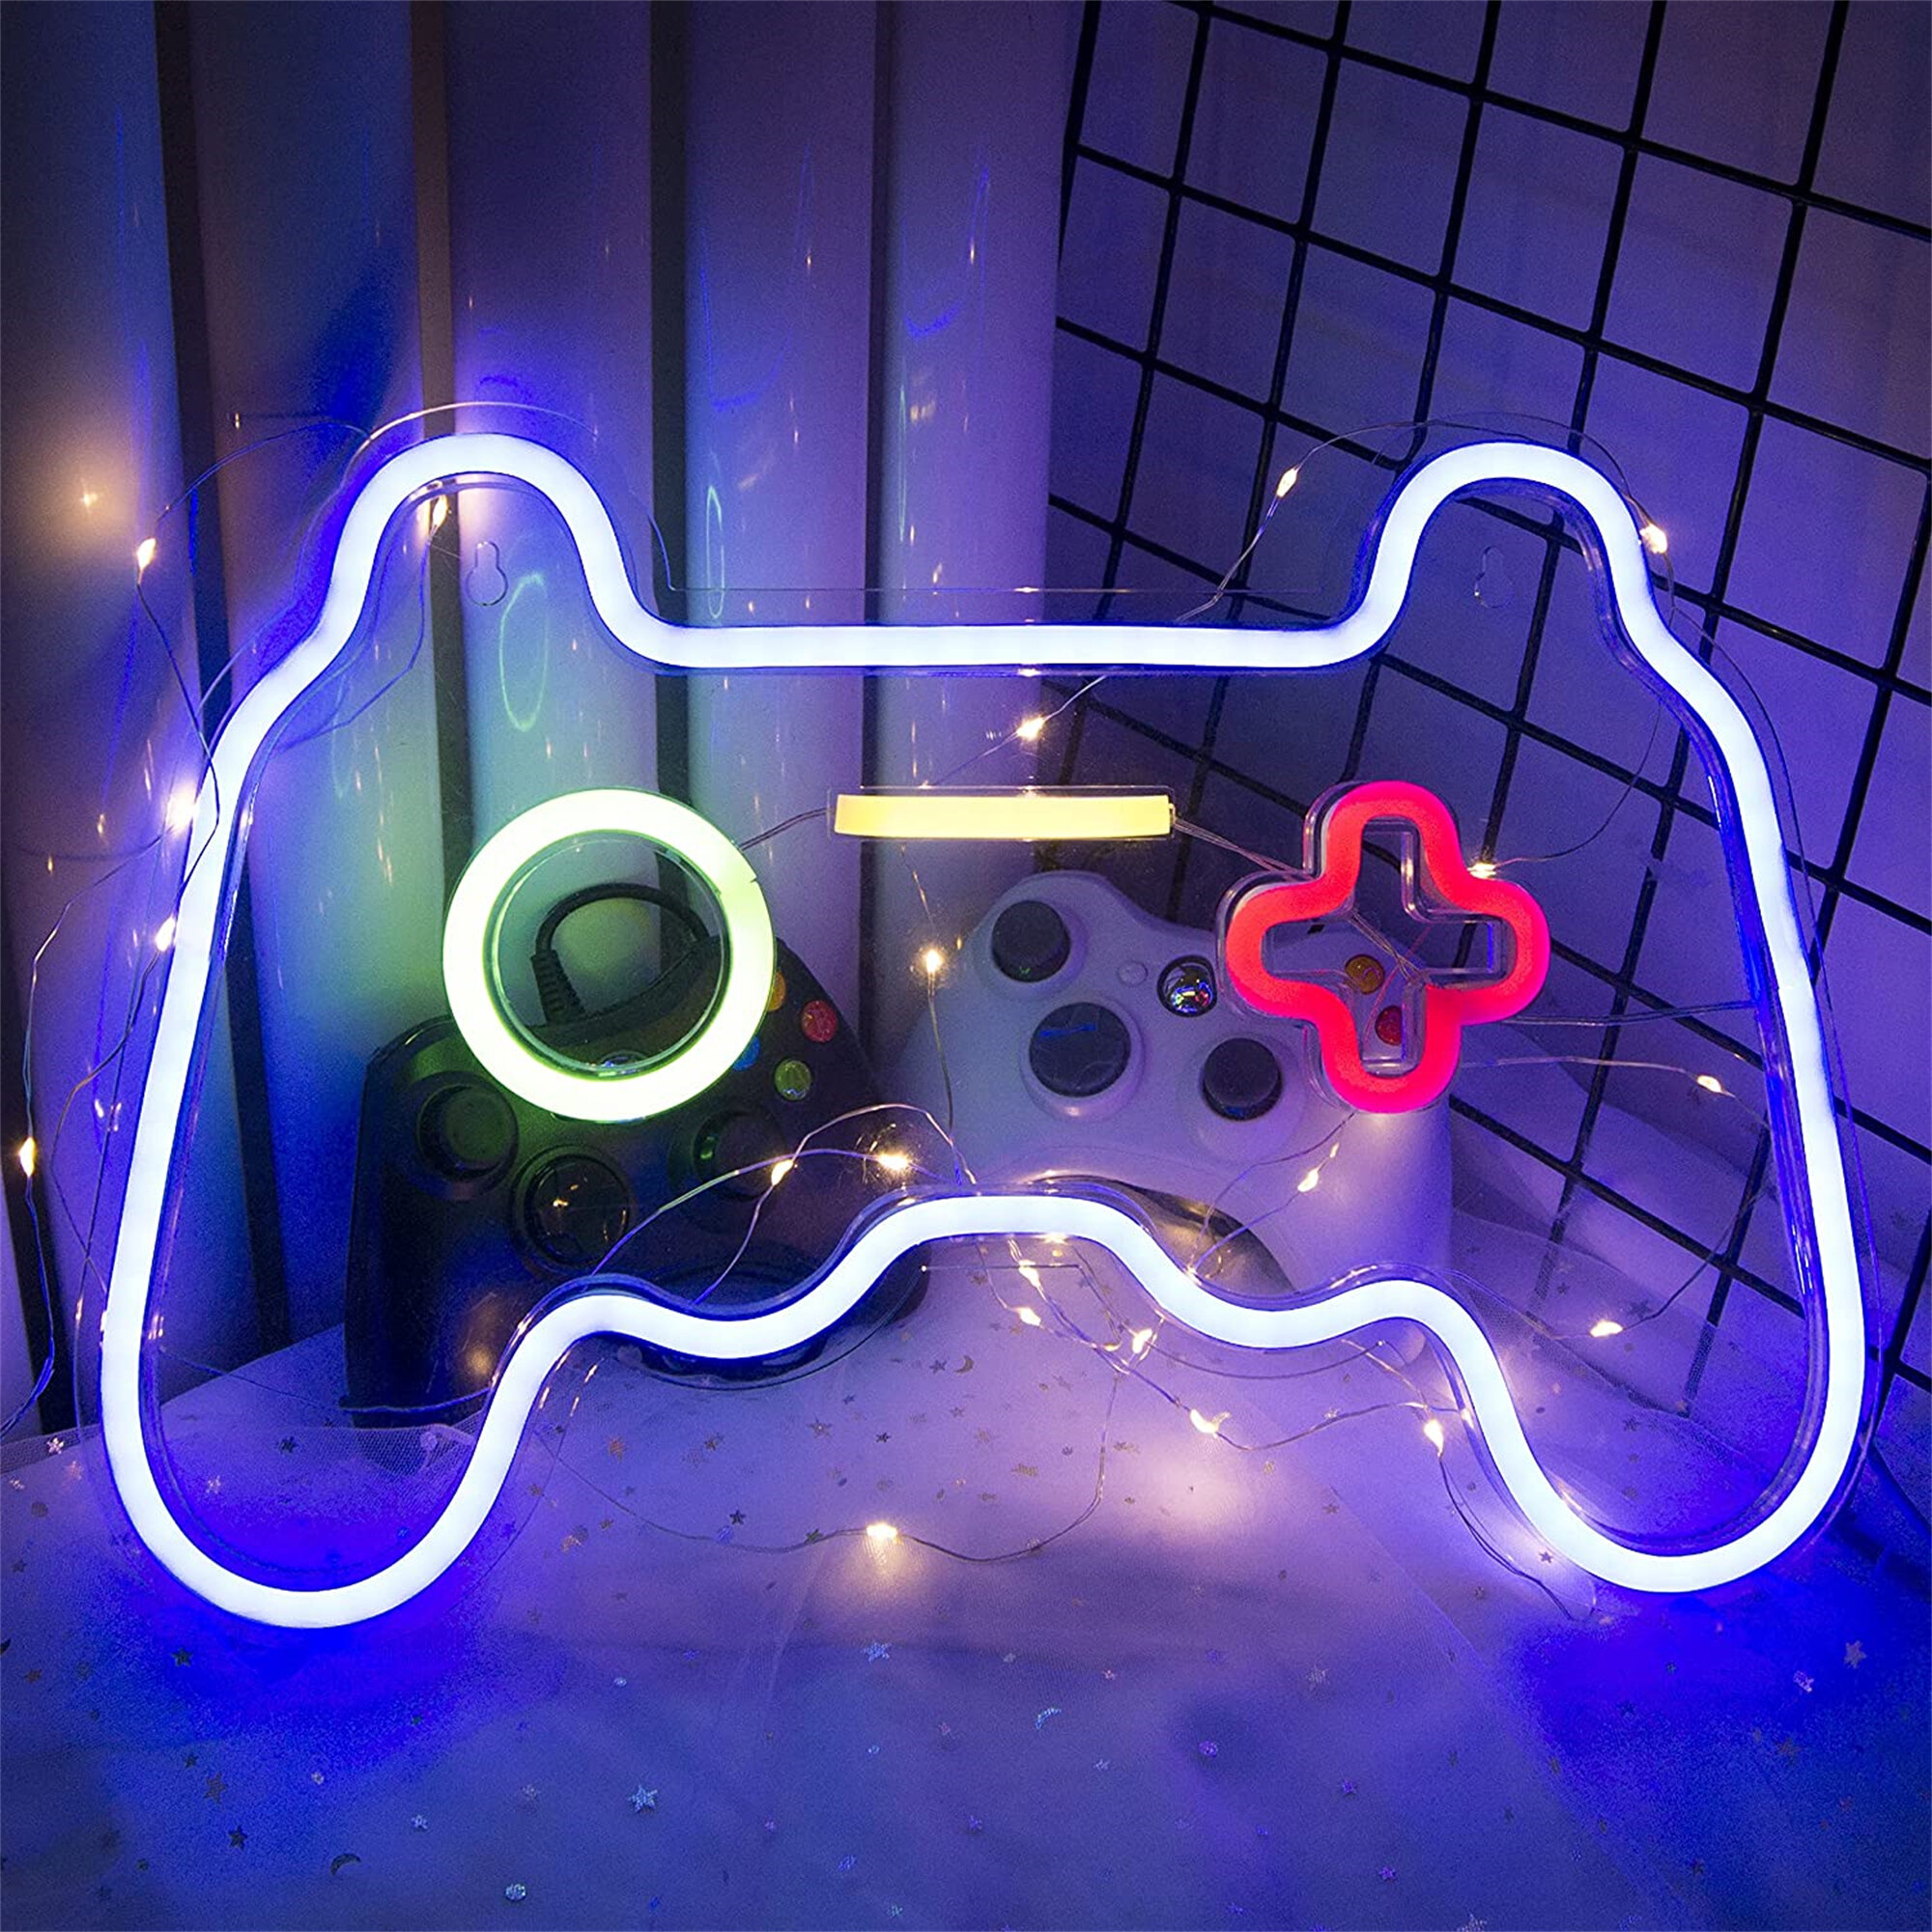 Trinx Shaped Neon Signs Playstation Lights Game Controller LED Neon Sign Light Up For Bedroom Wall Decor 16X 11 Bar Gaming Room Party Decoration